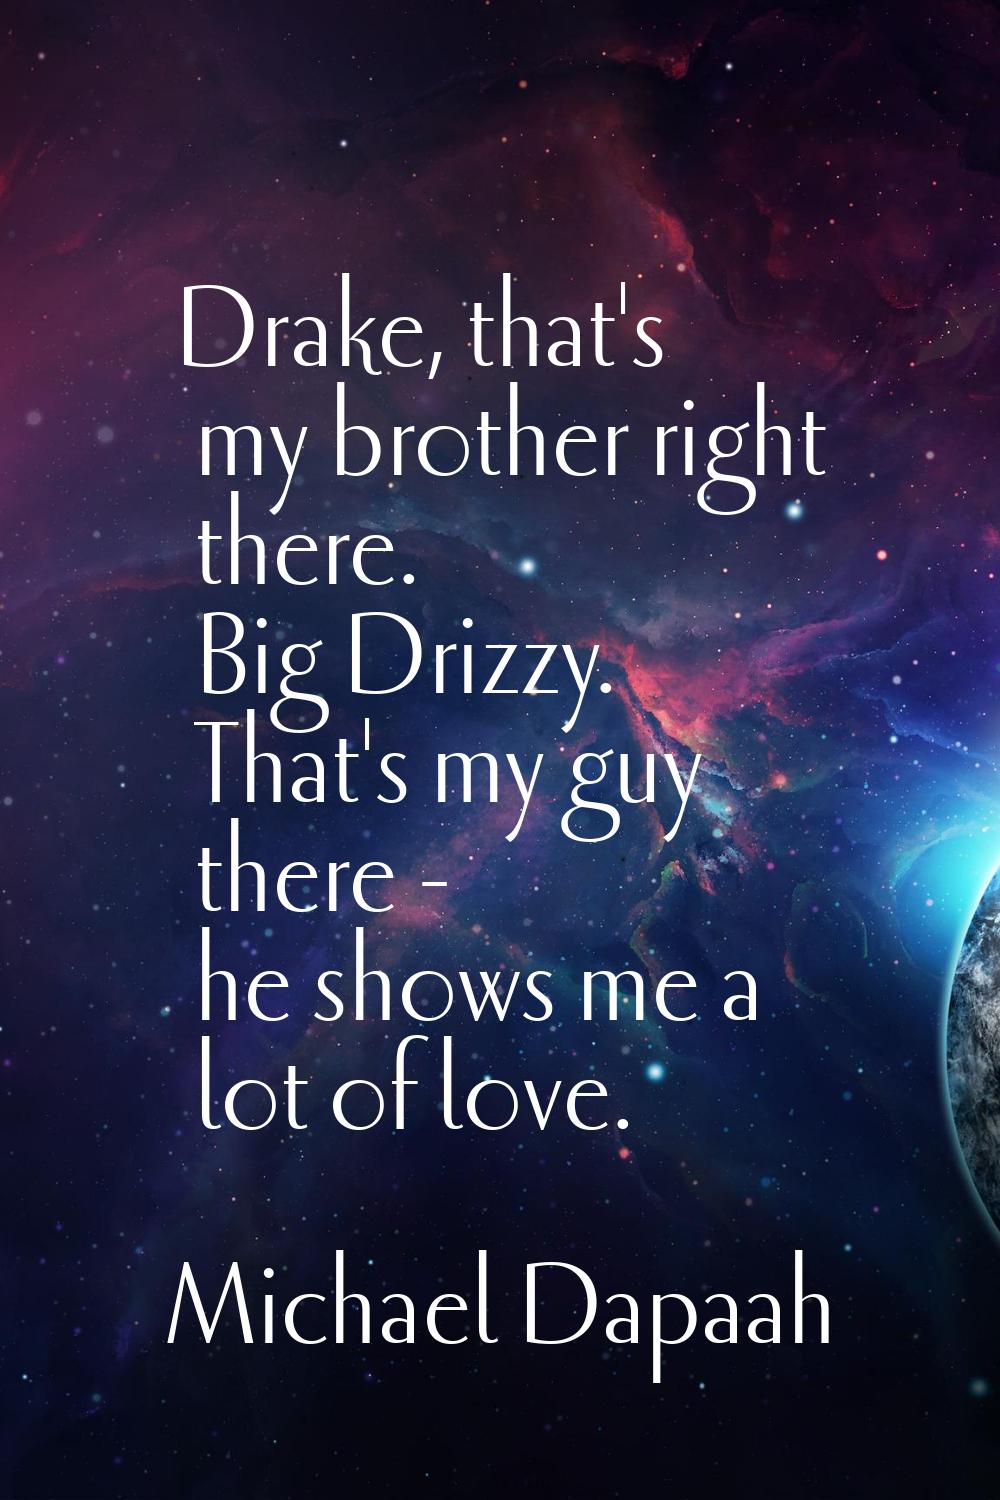 Drake, that's my brother right there. Big Drizzy. That's my guy there - he shows me a lot of love.